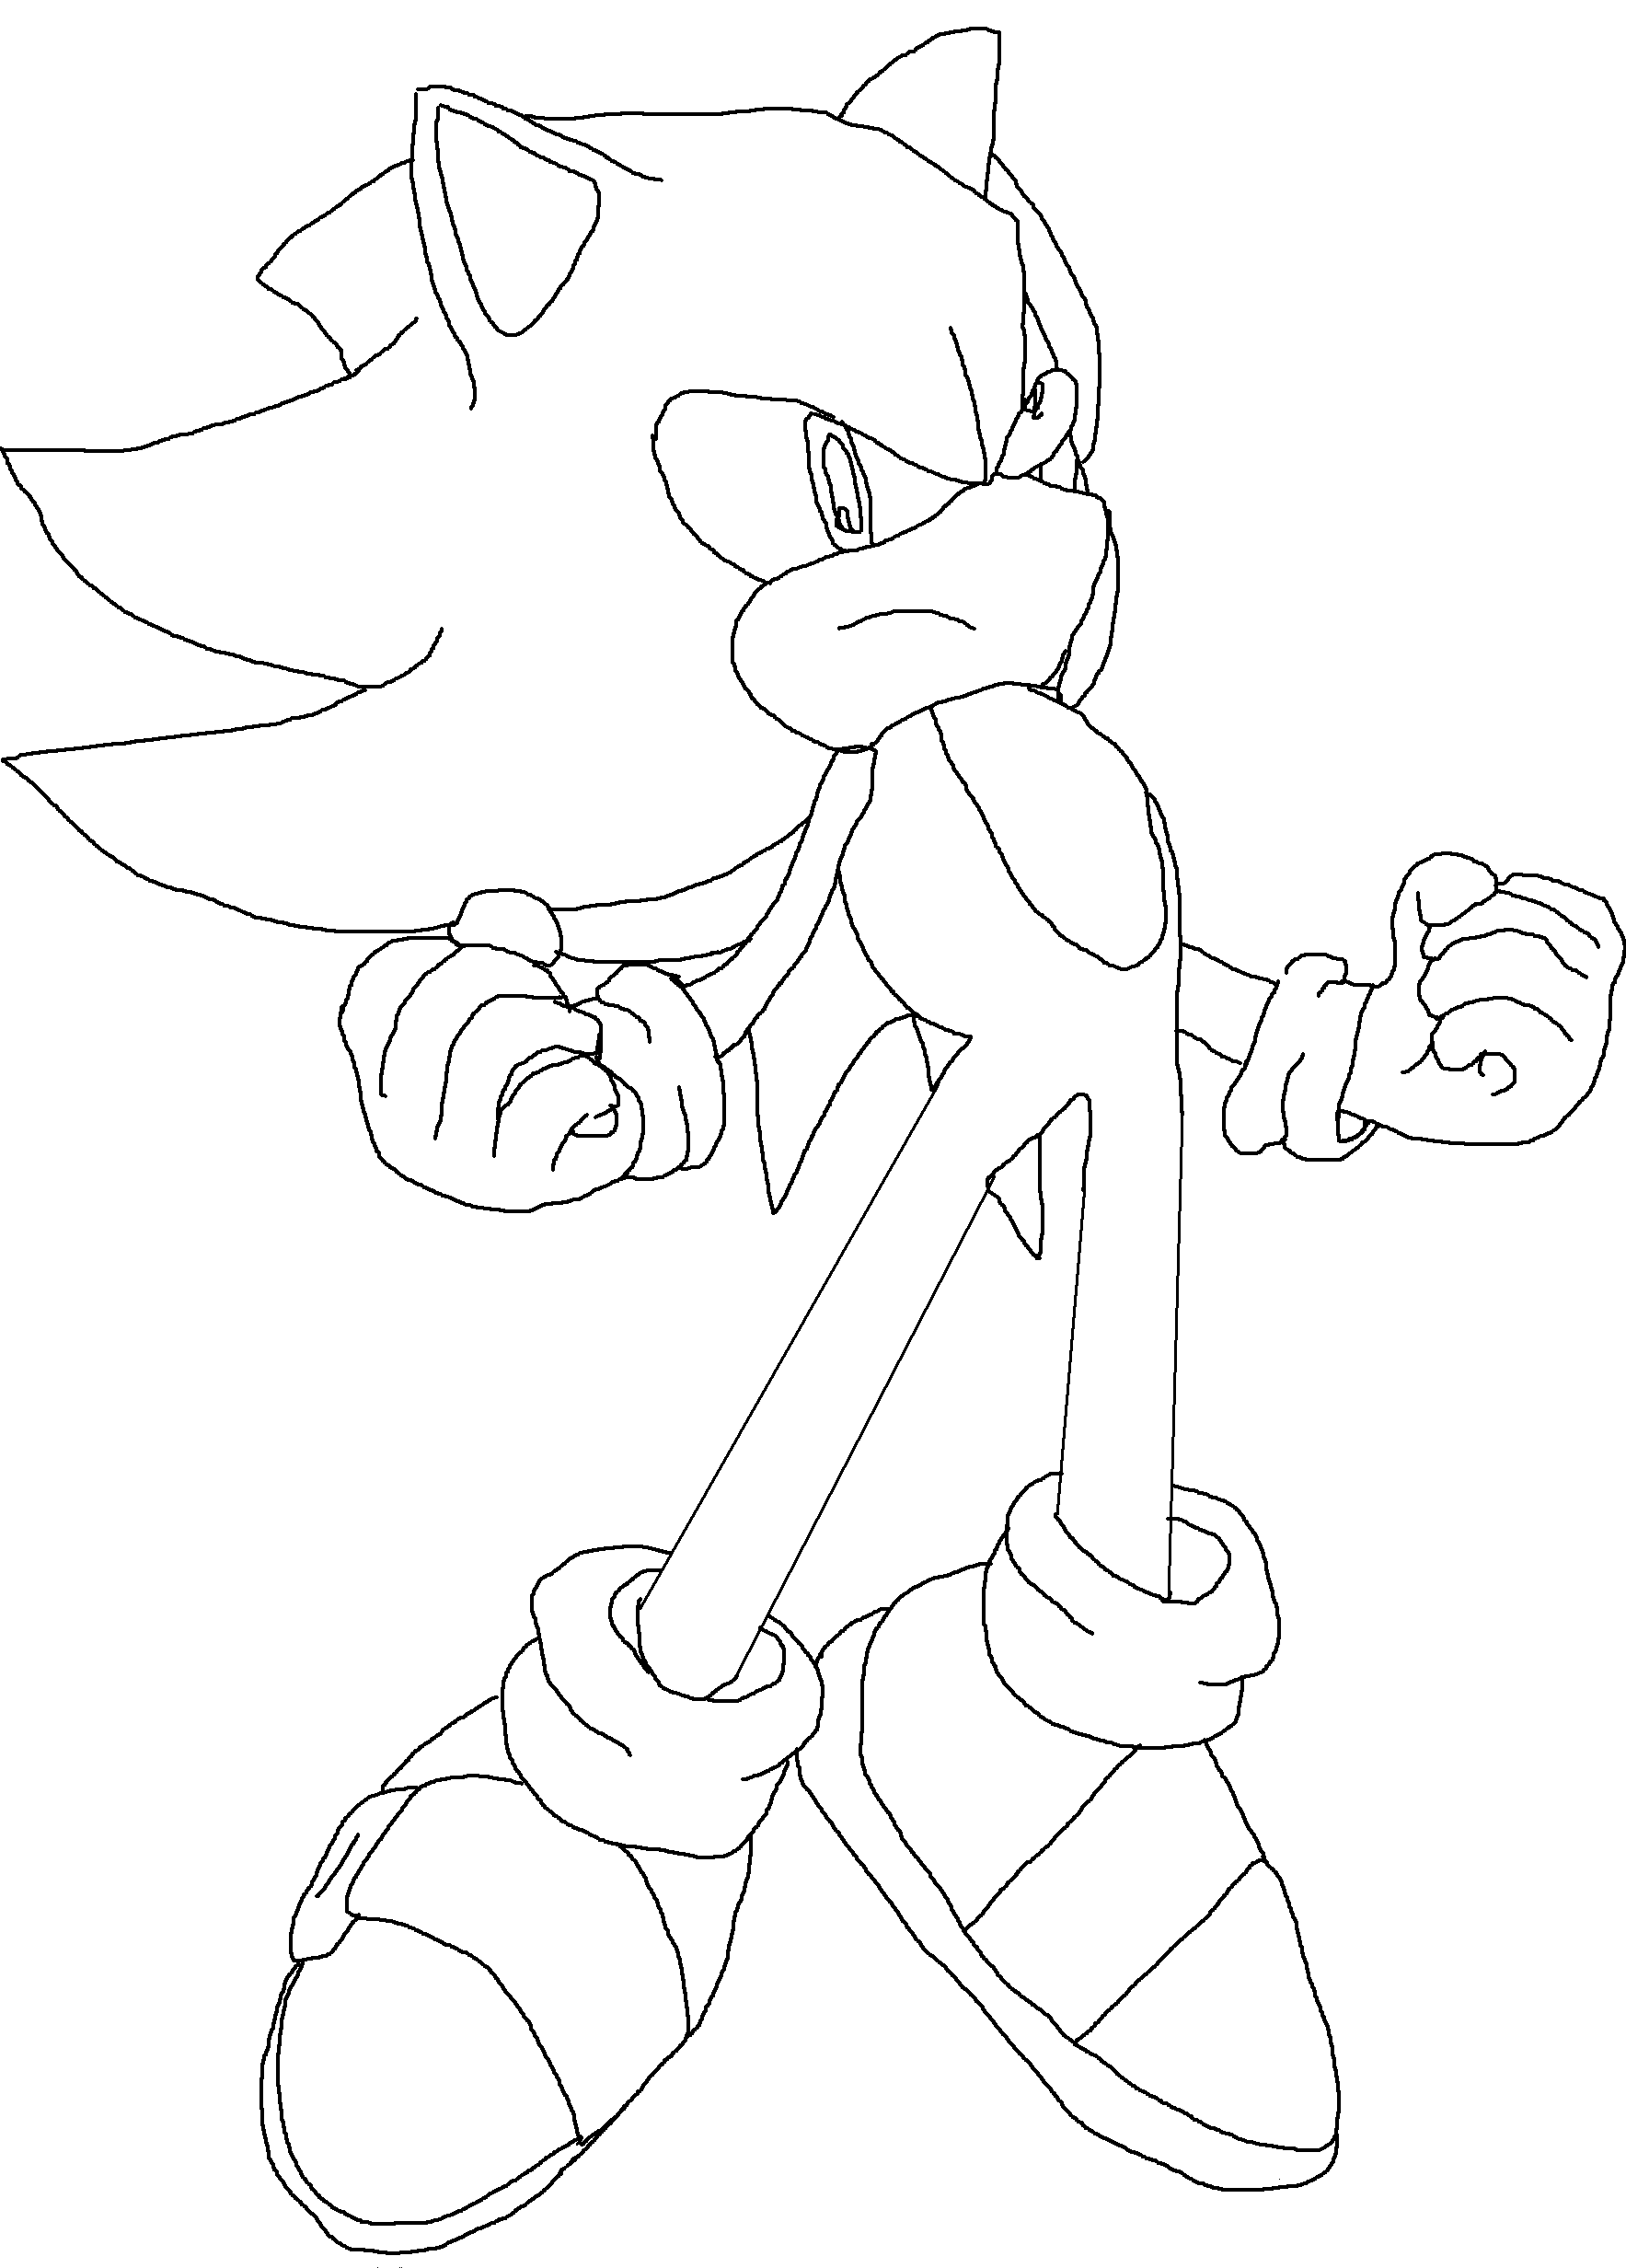 sonic printable coloring pages fun coloring pages sonic the hedgehog coloring pages coloring printable sonic pages 